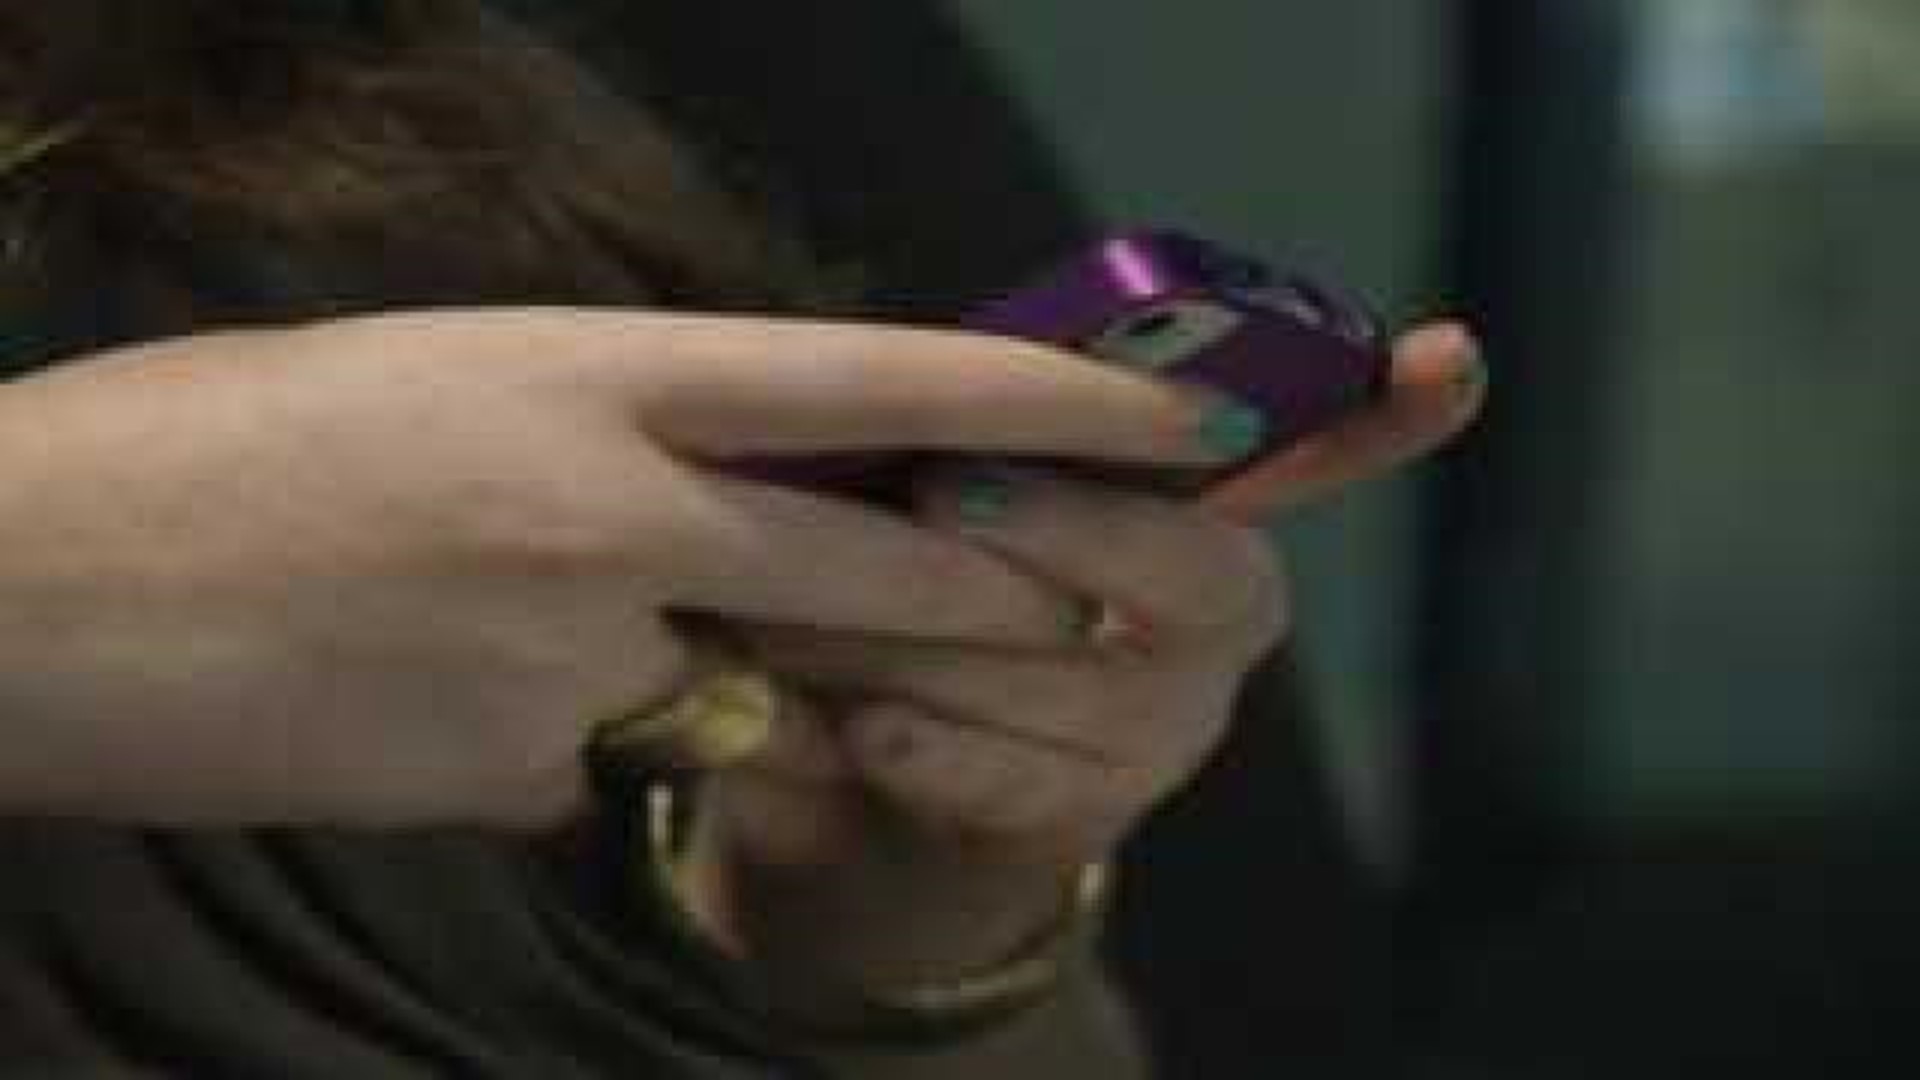 Teachers barred from contacting students through texts or social networks